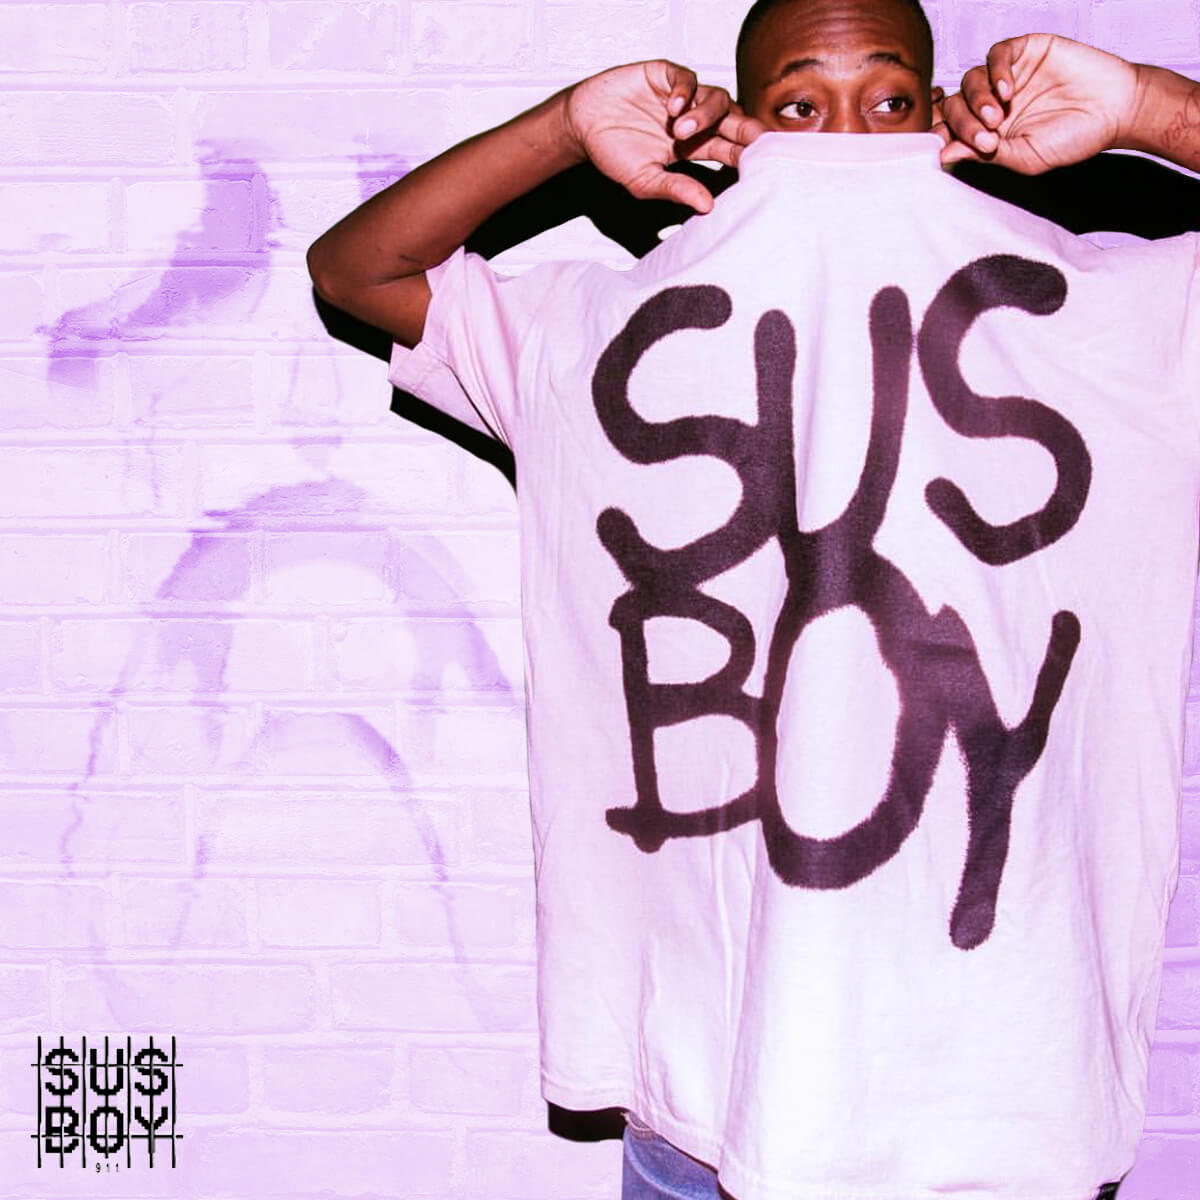 NEW ARRIVAL TEES FEAT. SUS BOY & MORE - SHOP NEW TEES